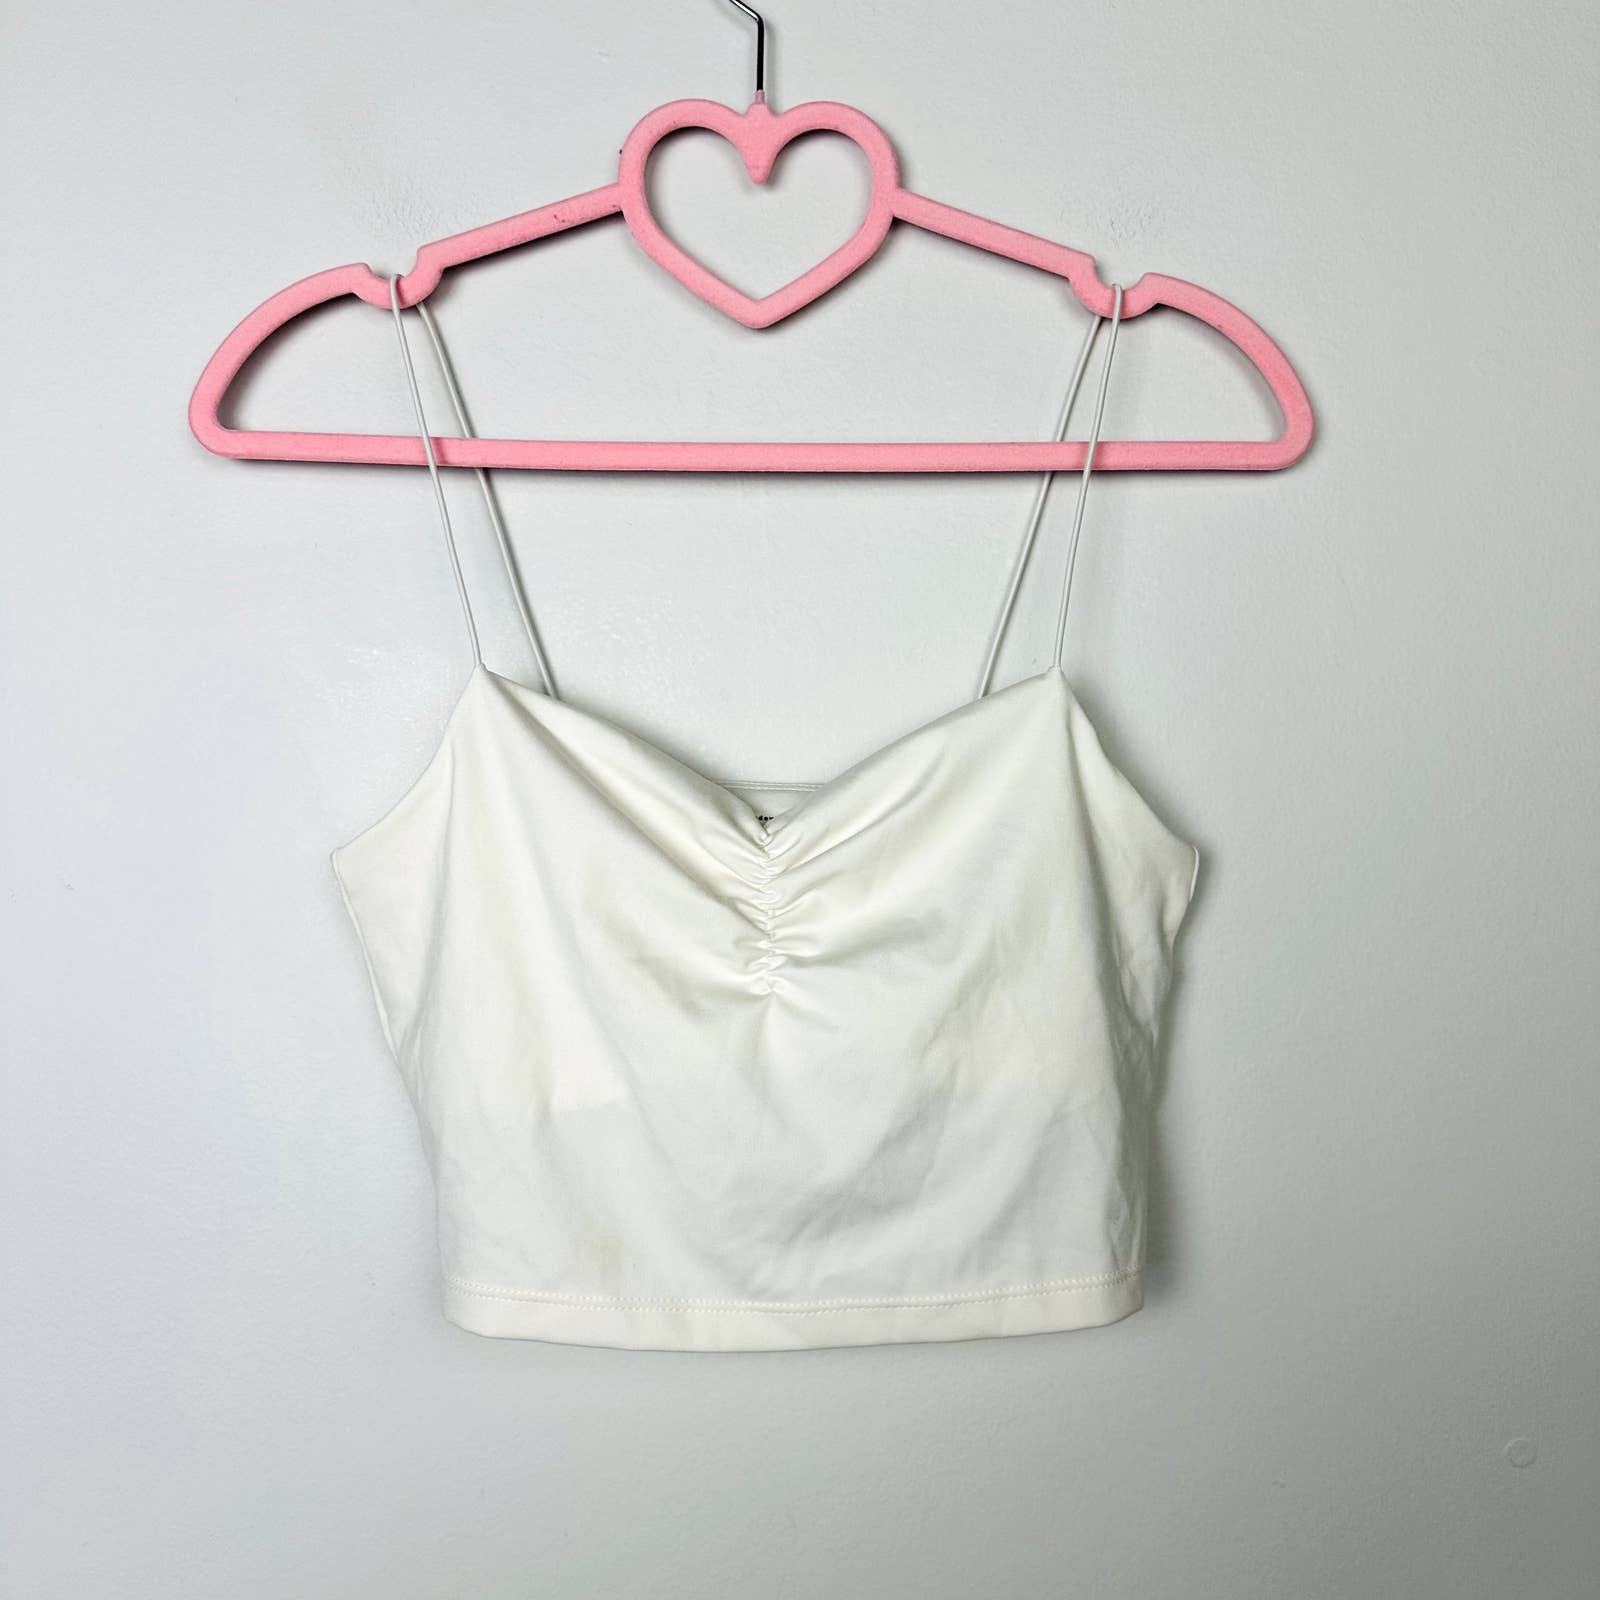 Madewell NWT Flex Sweetheart Crop Tank Top in Lighthouse Size Small